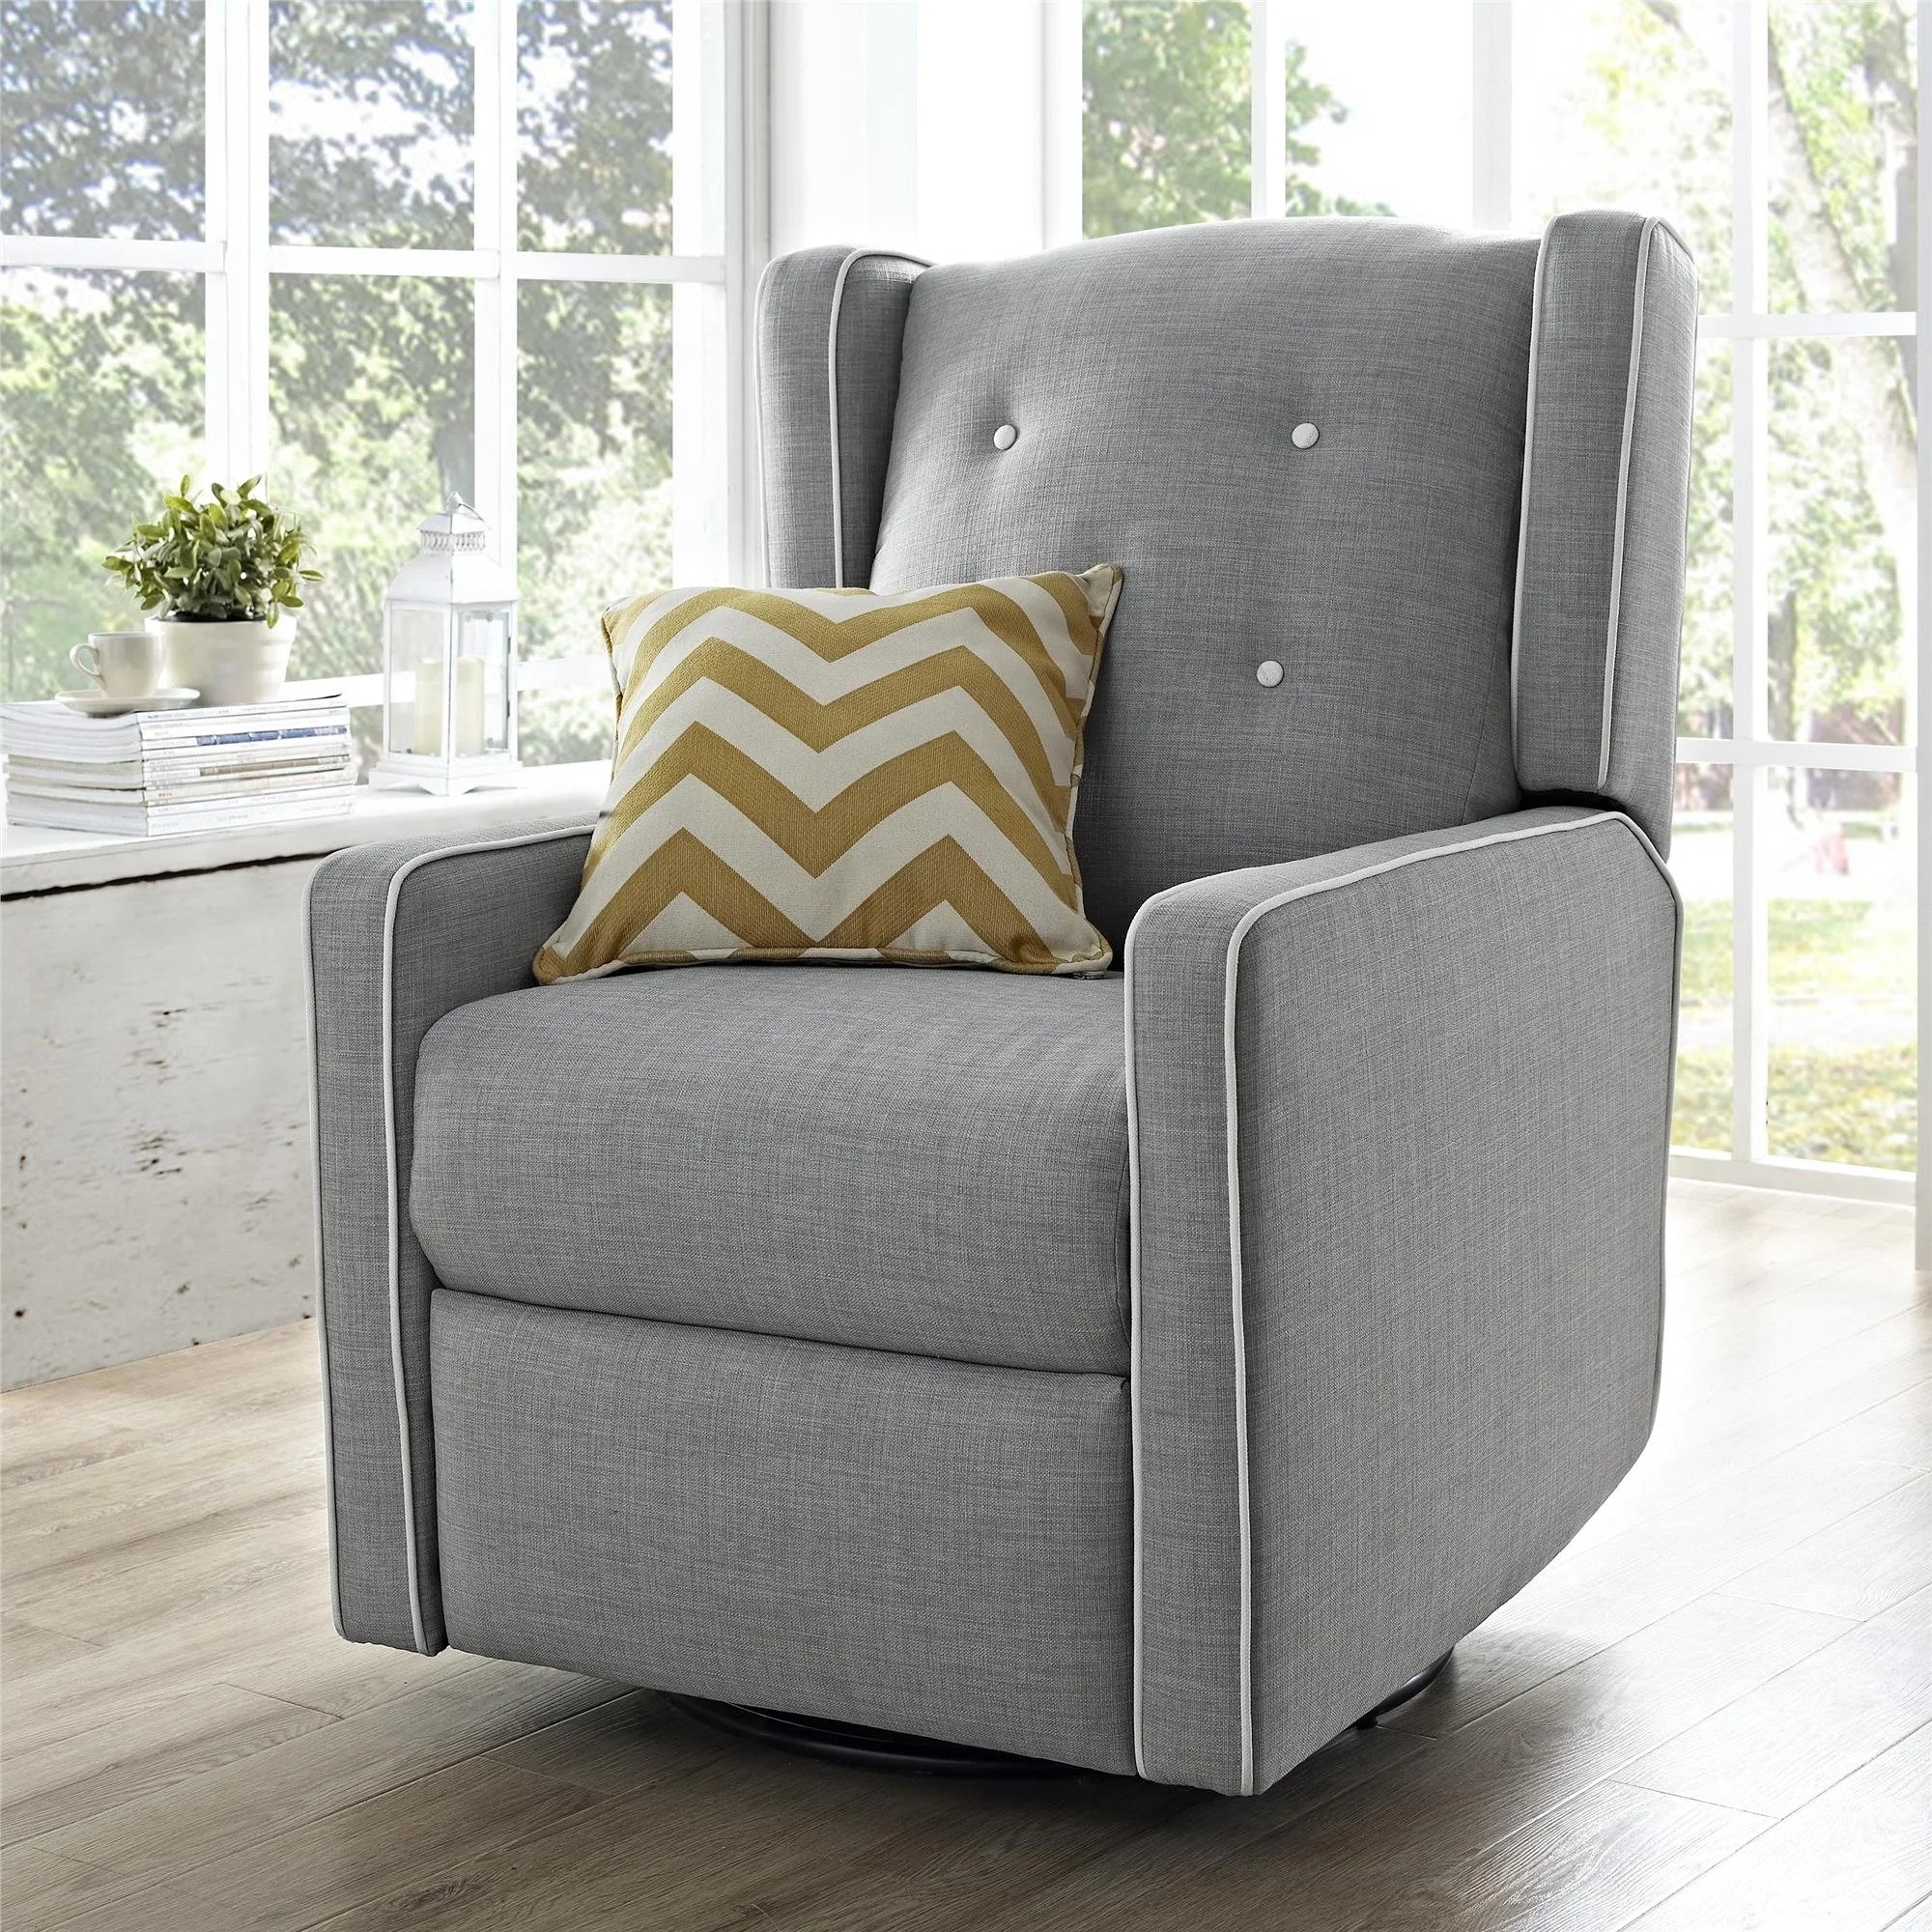 The recliner chair in a wingback design in grey